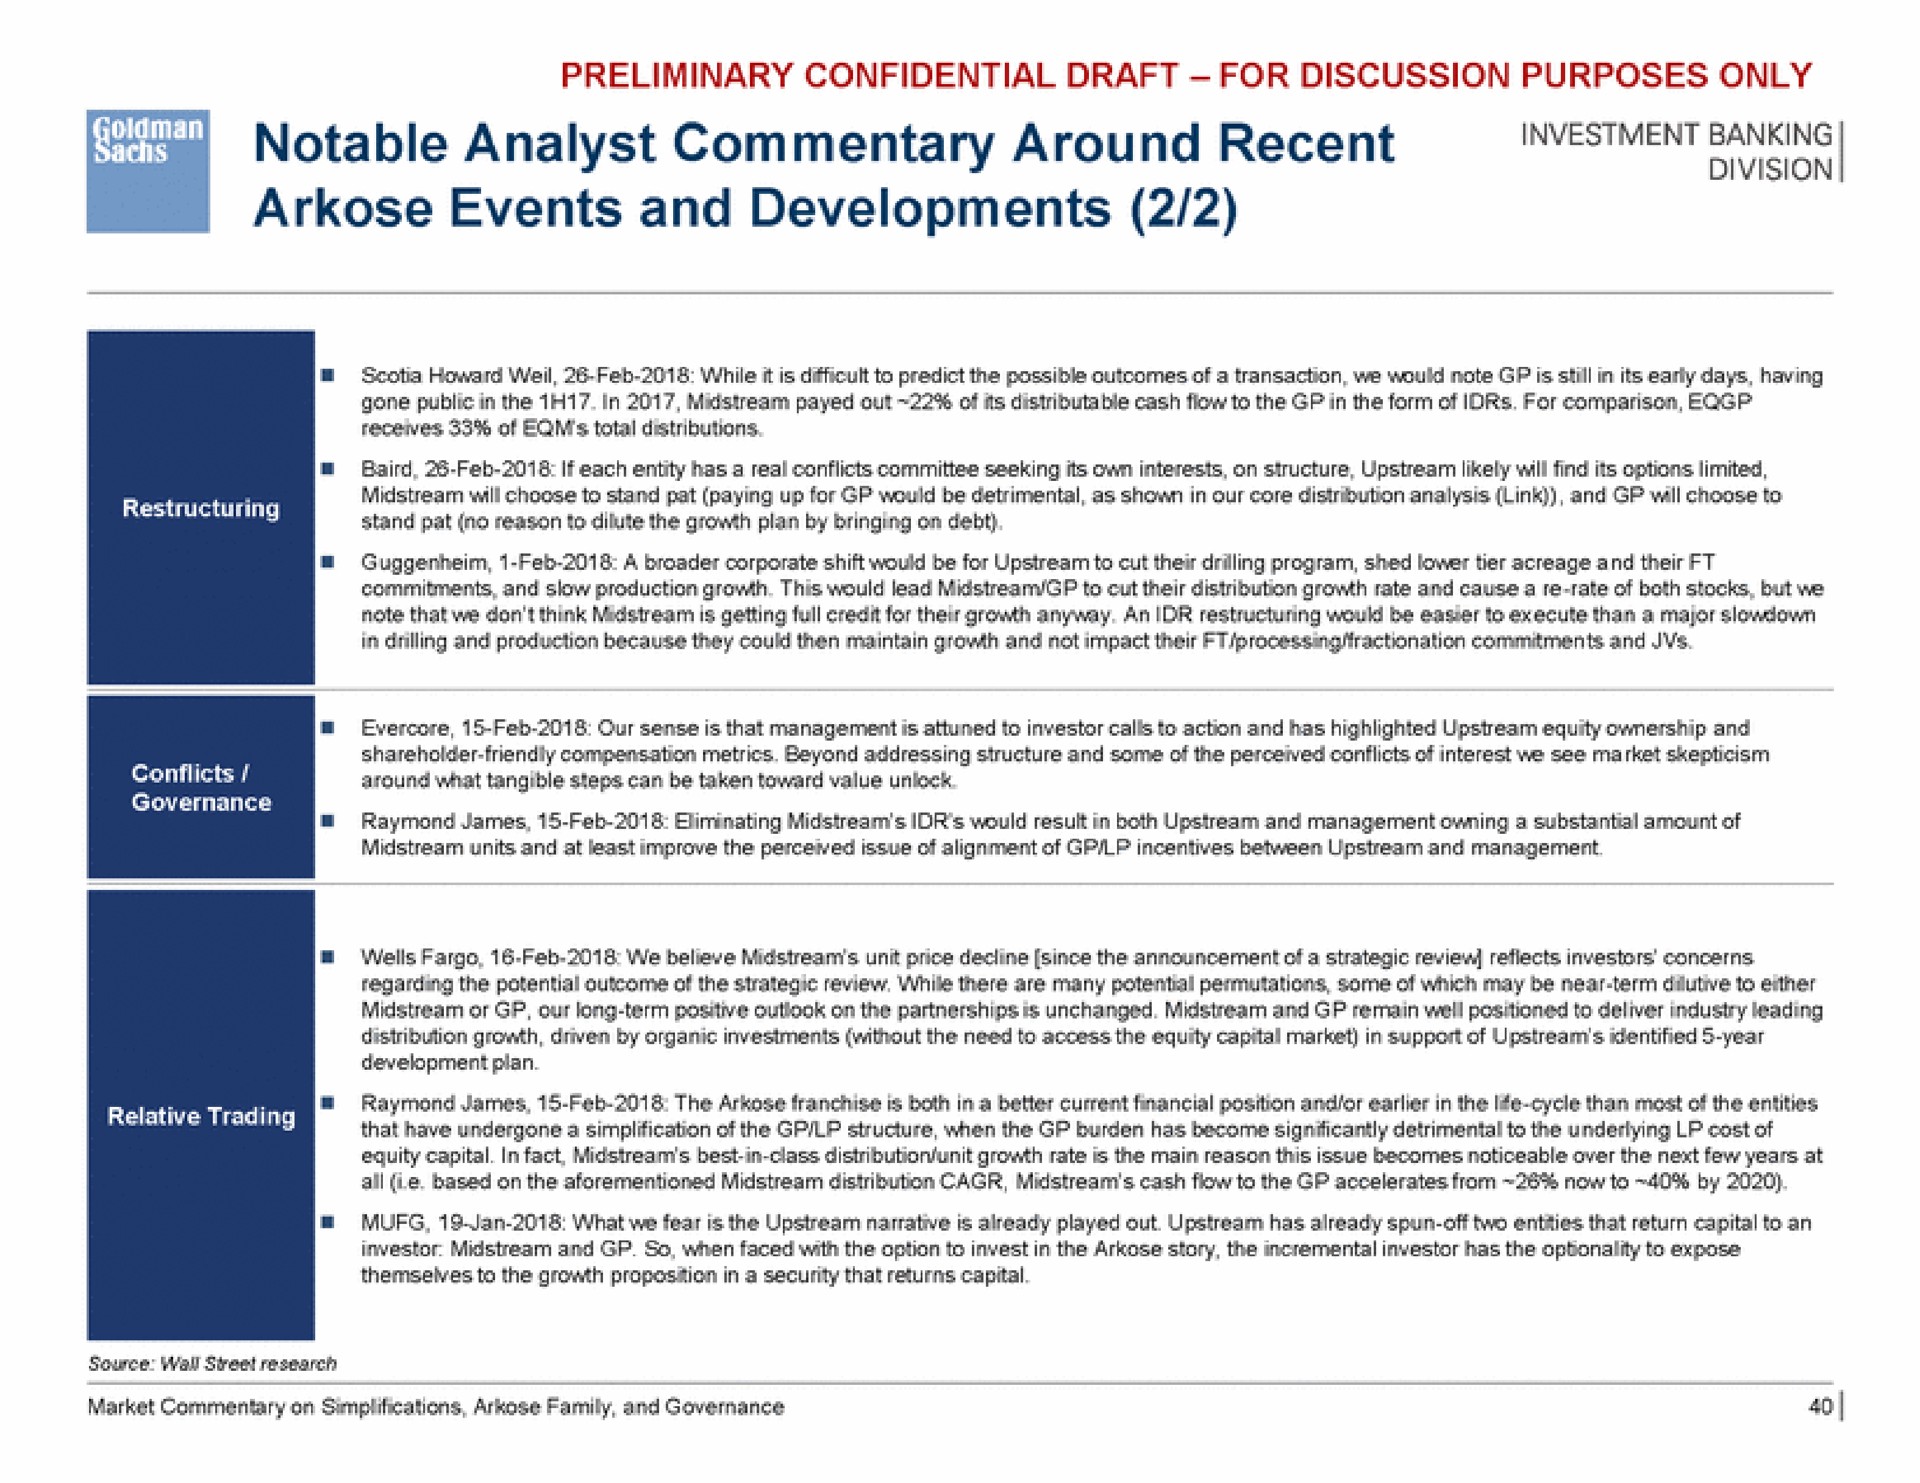 notable analyst commentary around recent arkose events and developments | Goldman Sachs